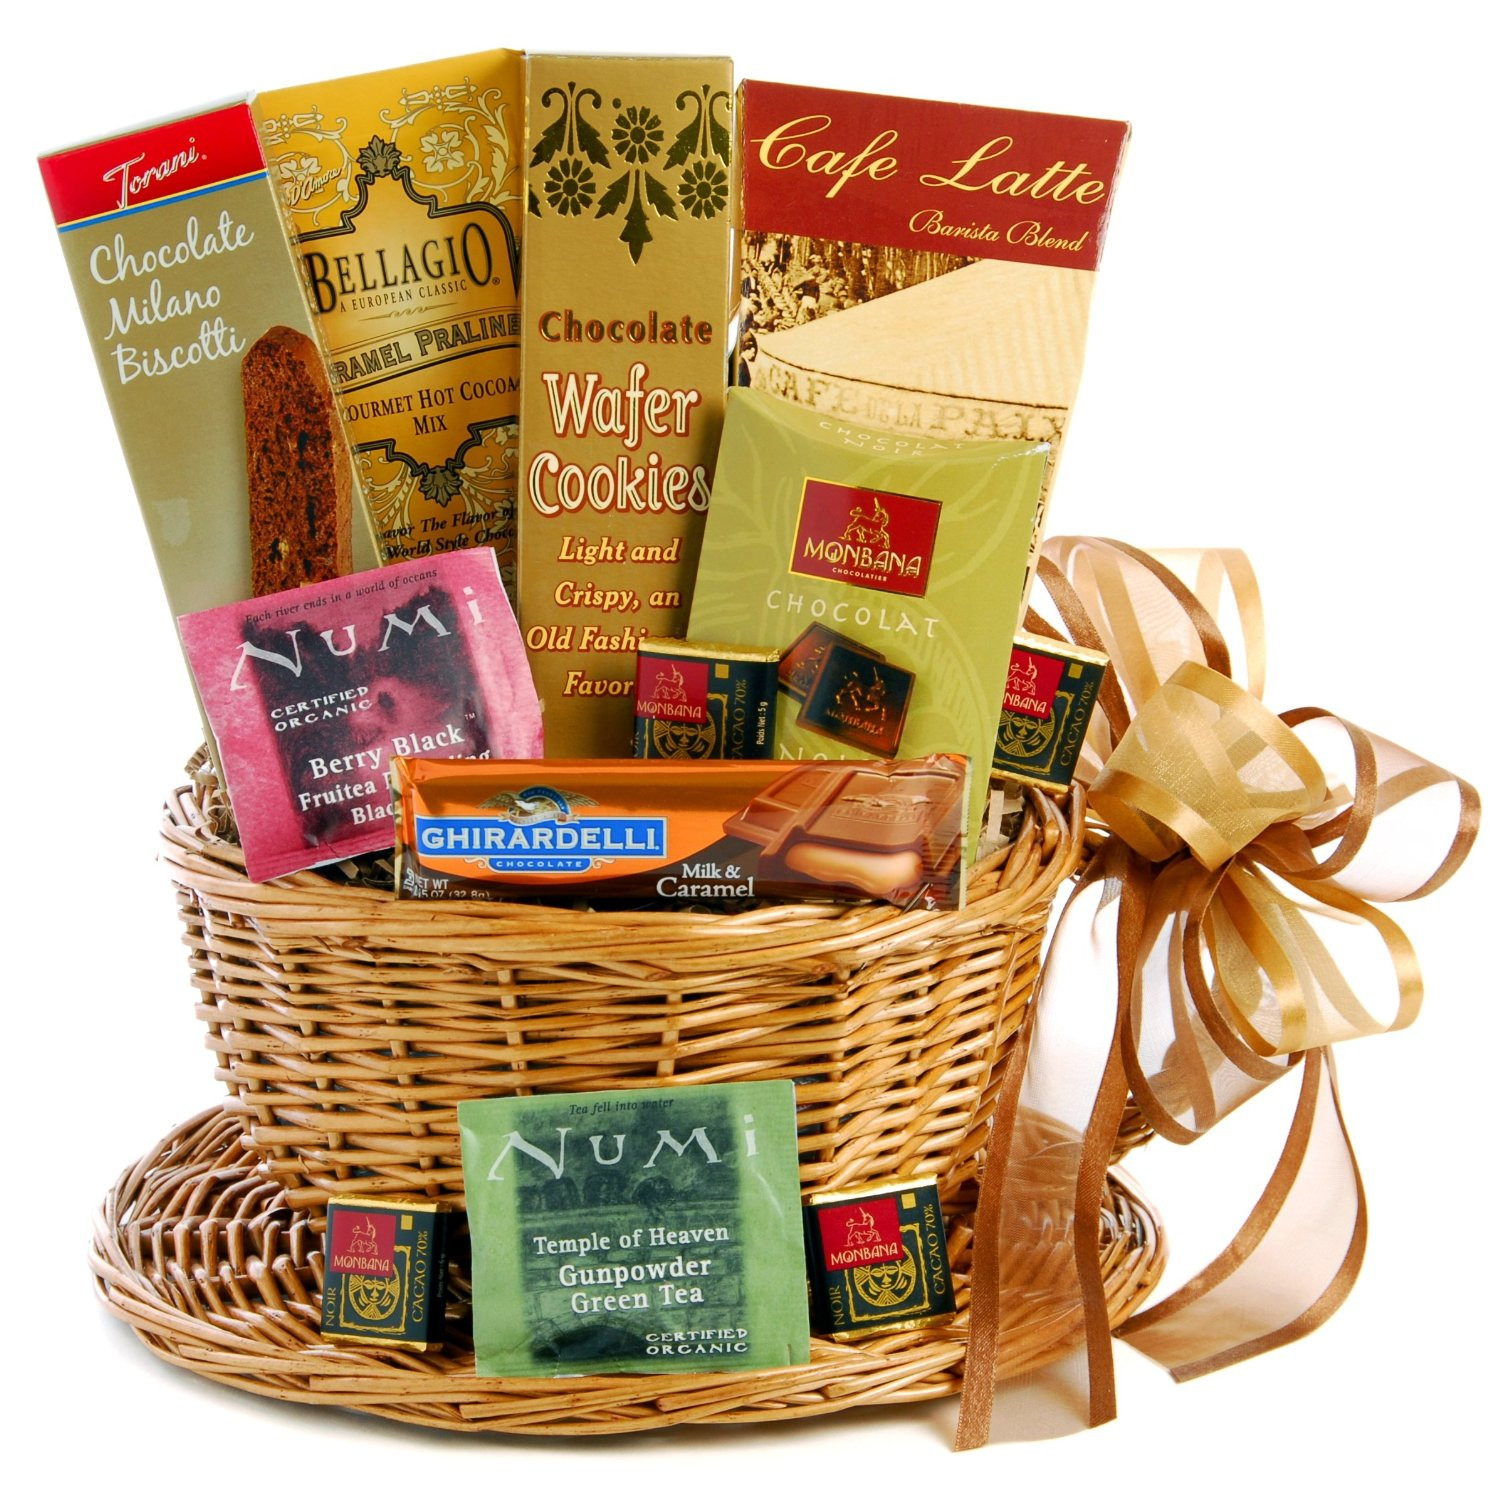 Mothers Day Wine Gift Baskets
 Amazon Mother s Day Deals Coffee & Tea Gift Basket